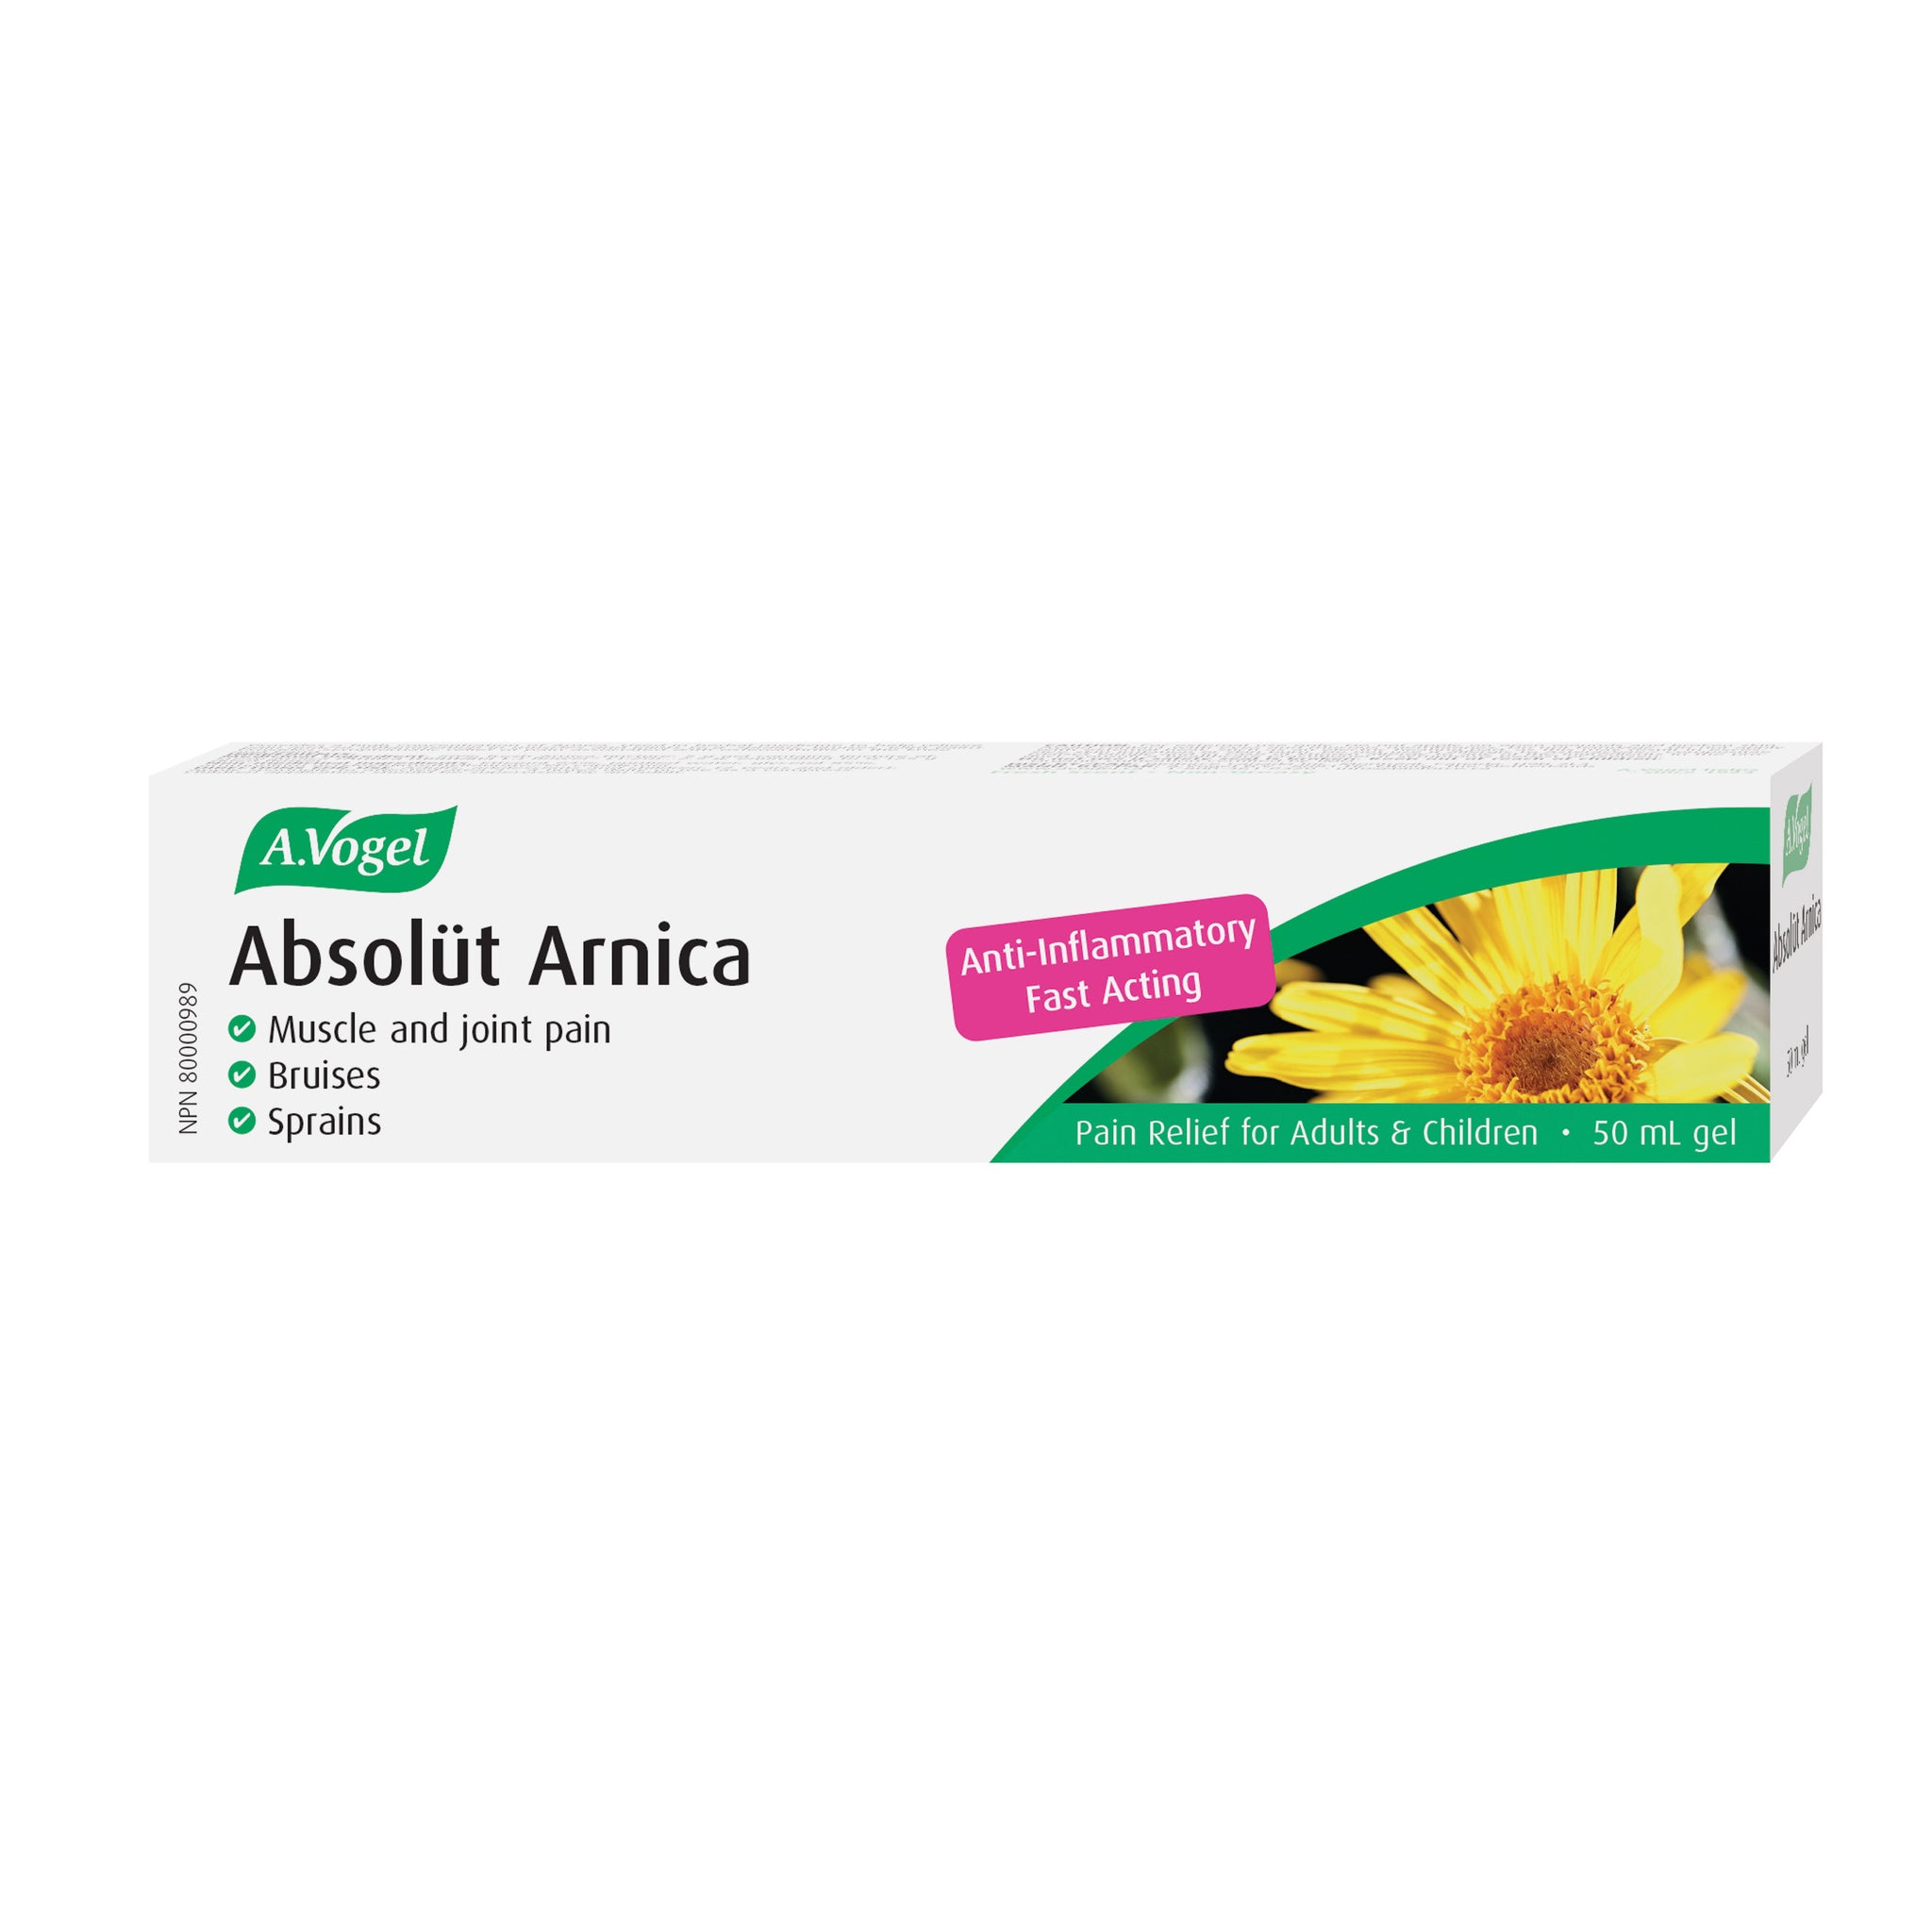 Absolüt Arnica Gel - -Bruises and Joint Pain 50 ml - A.Vogel - A